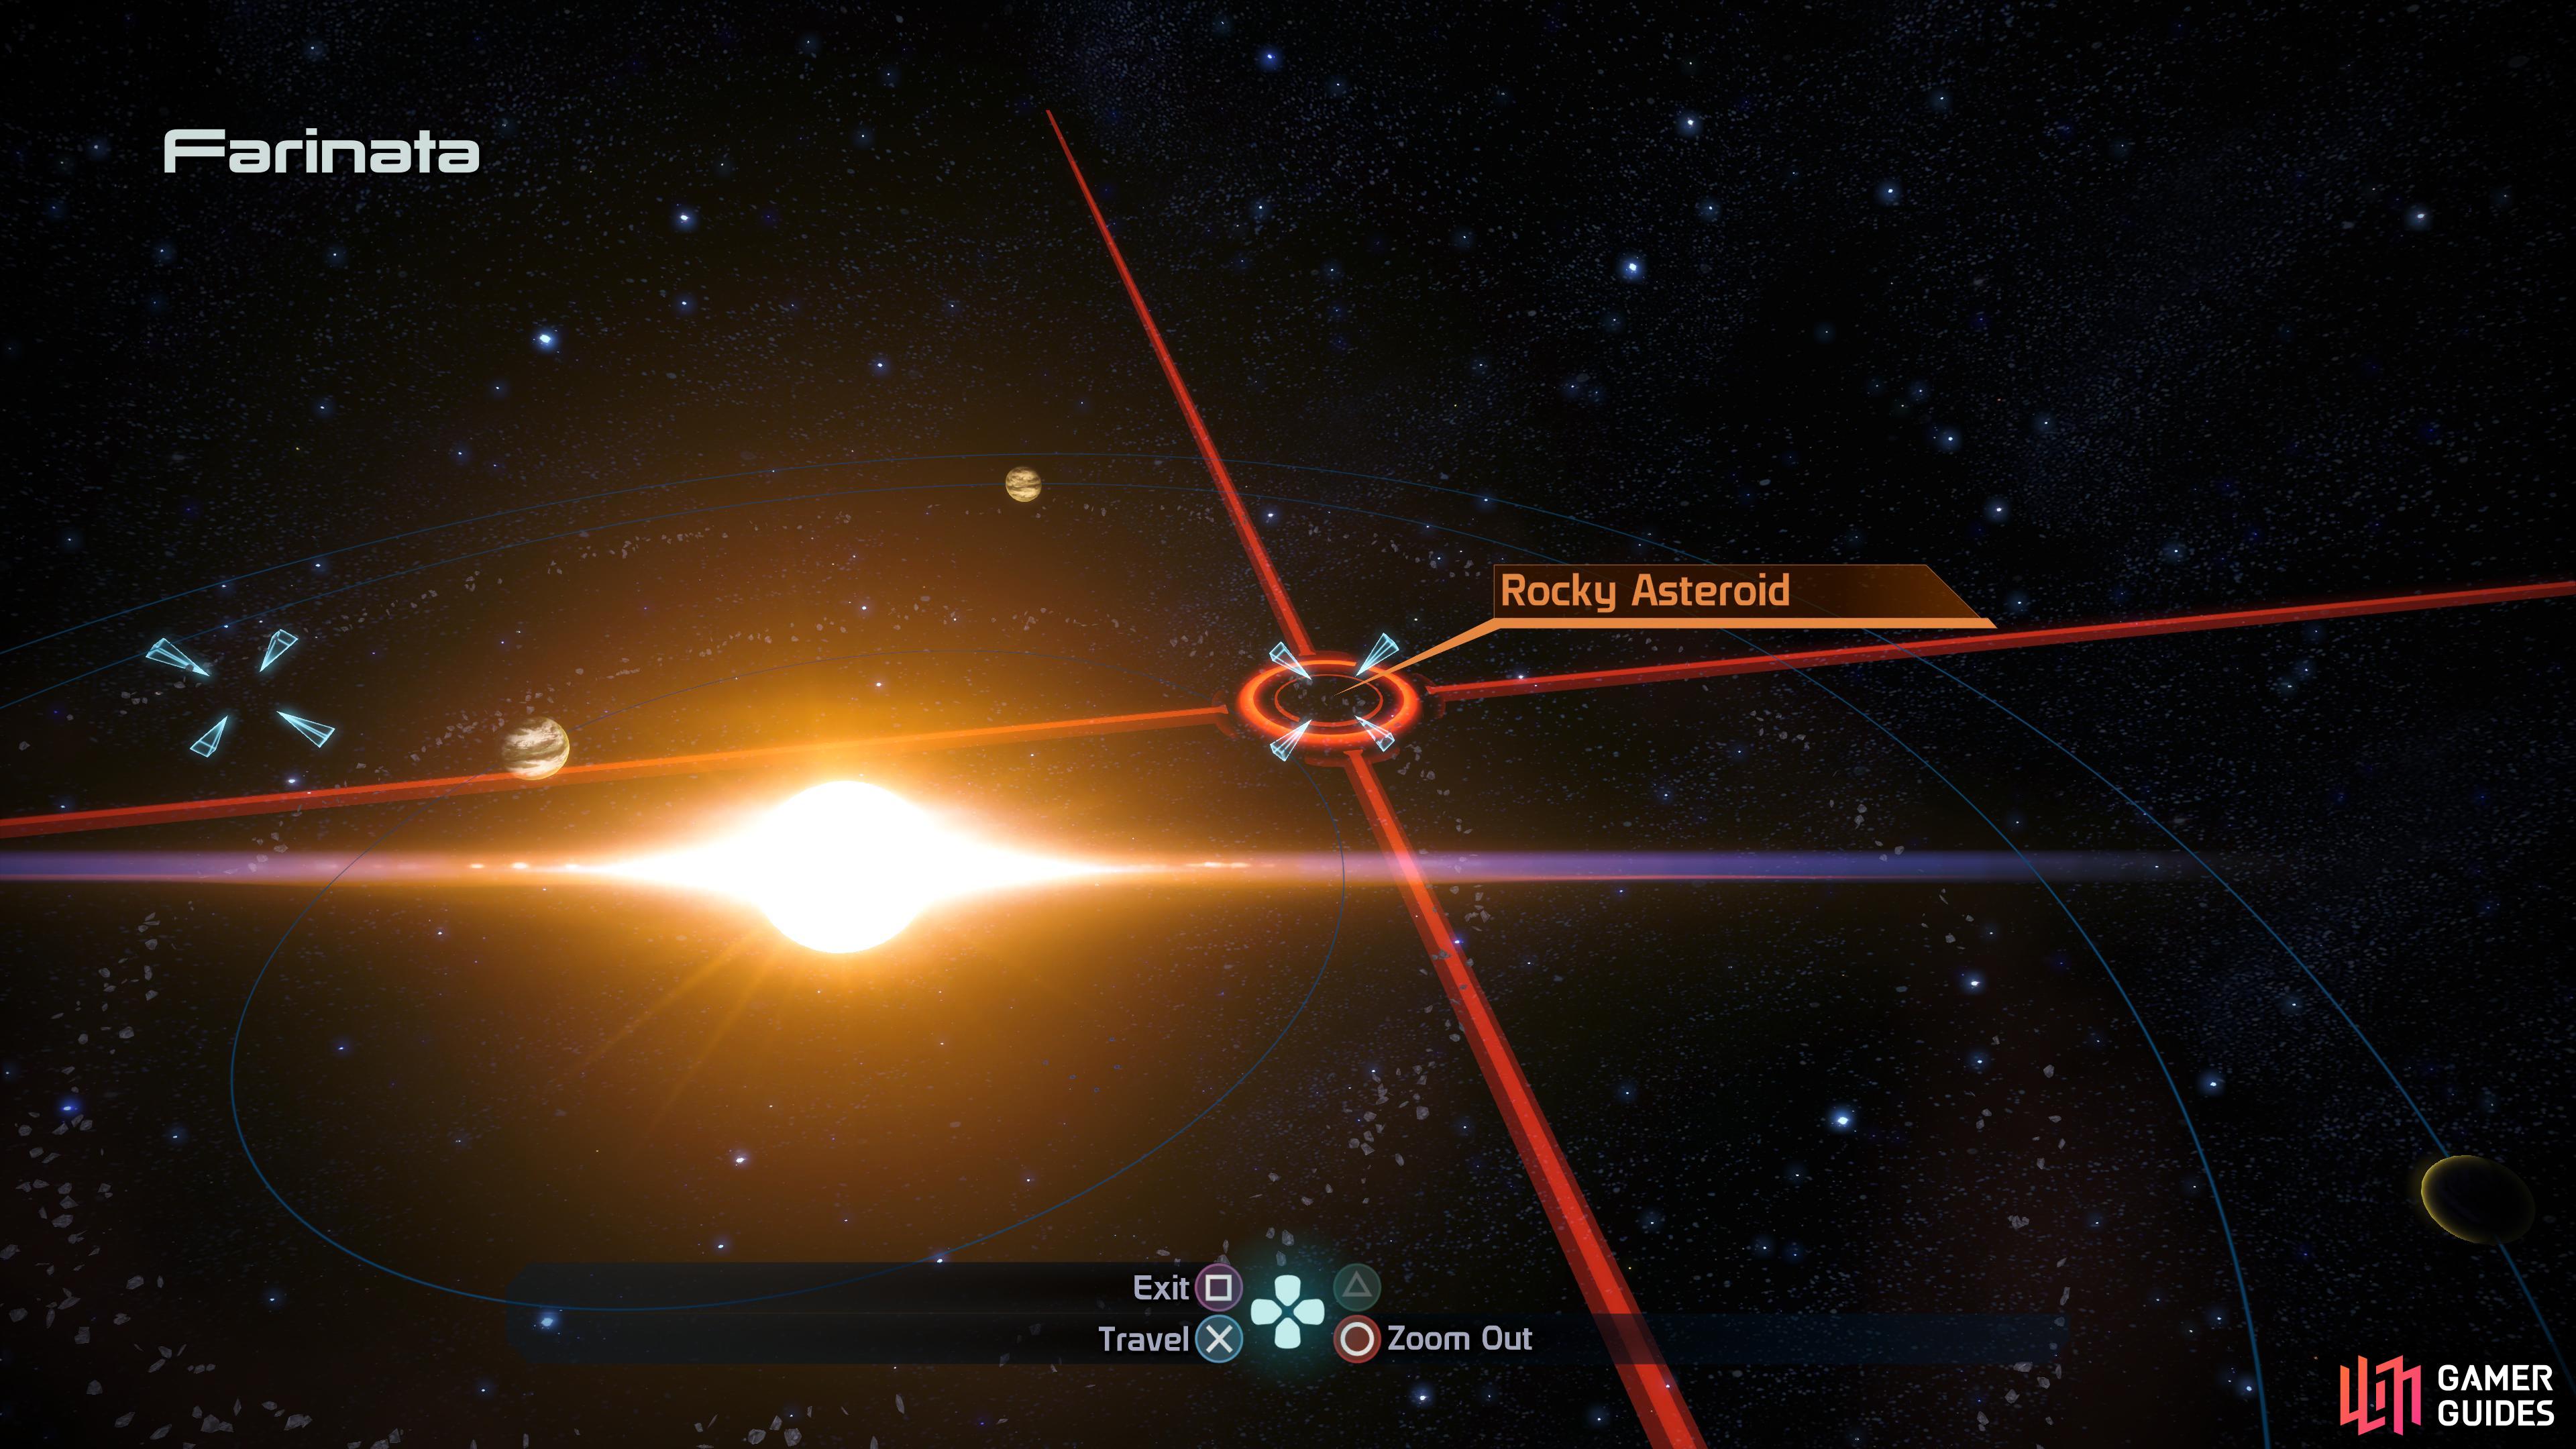 The location of a rocky asteroid in the Farinata system.